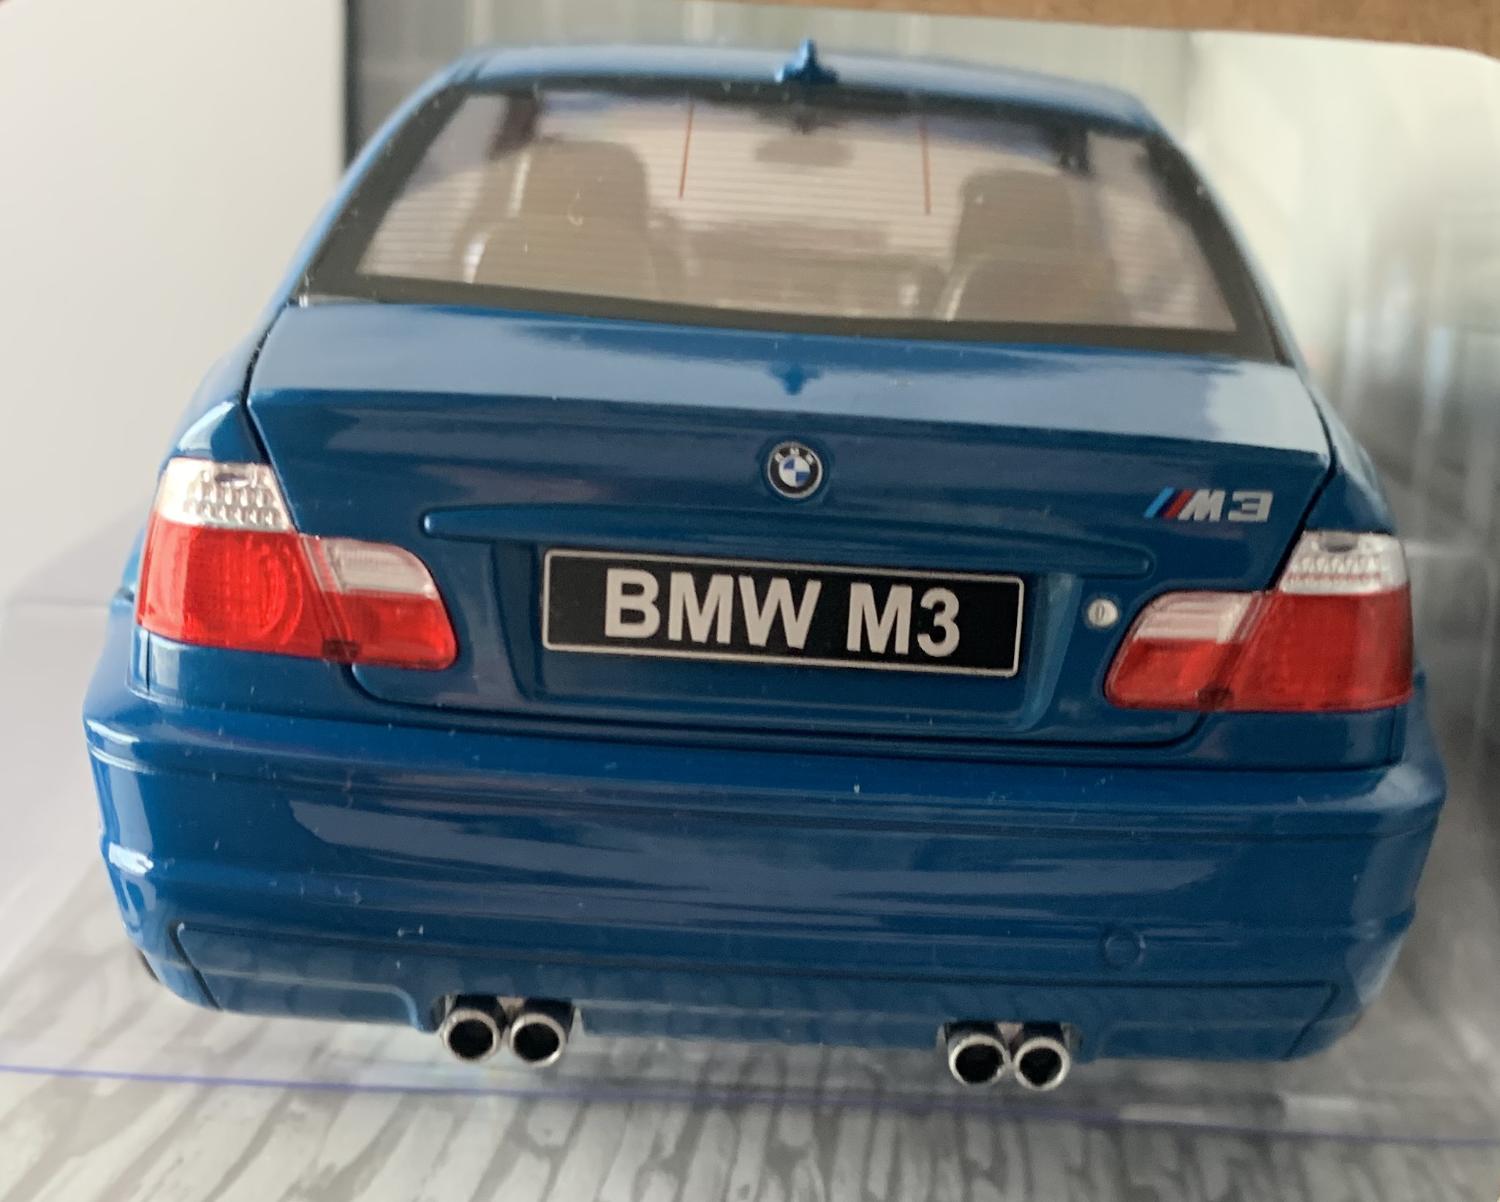 A very good representation of the BMW E46 Coupe M3 decorated in laguna blue with alloy wheels.  Other trims are finished in black, chrome and silver.  Features include working wheels, opening driver and passenger doors